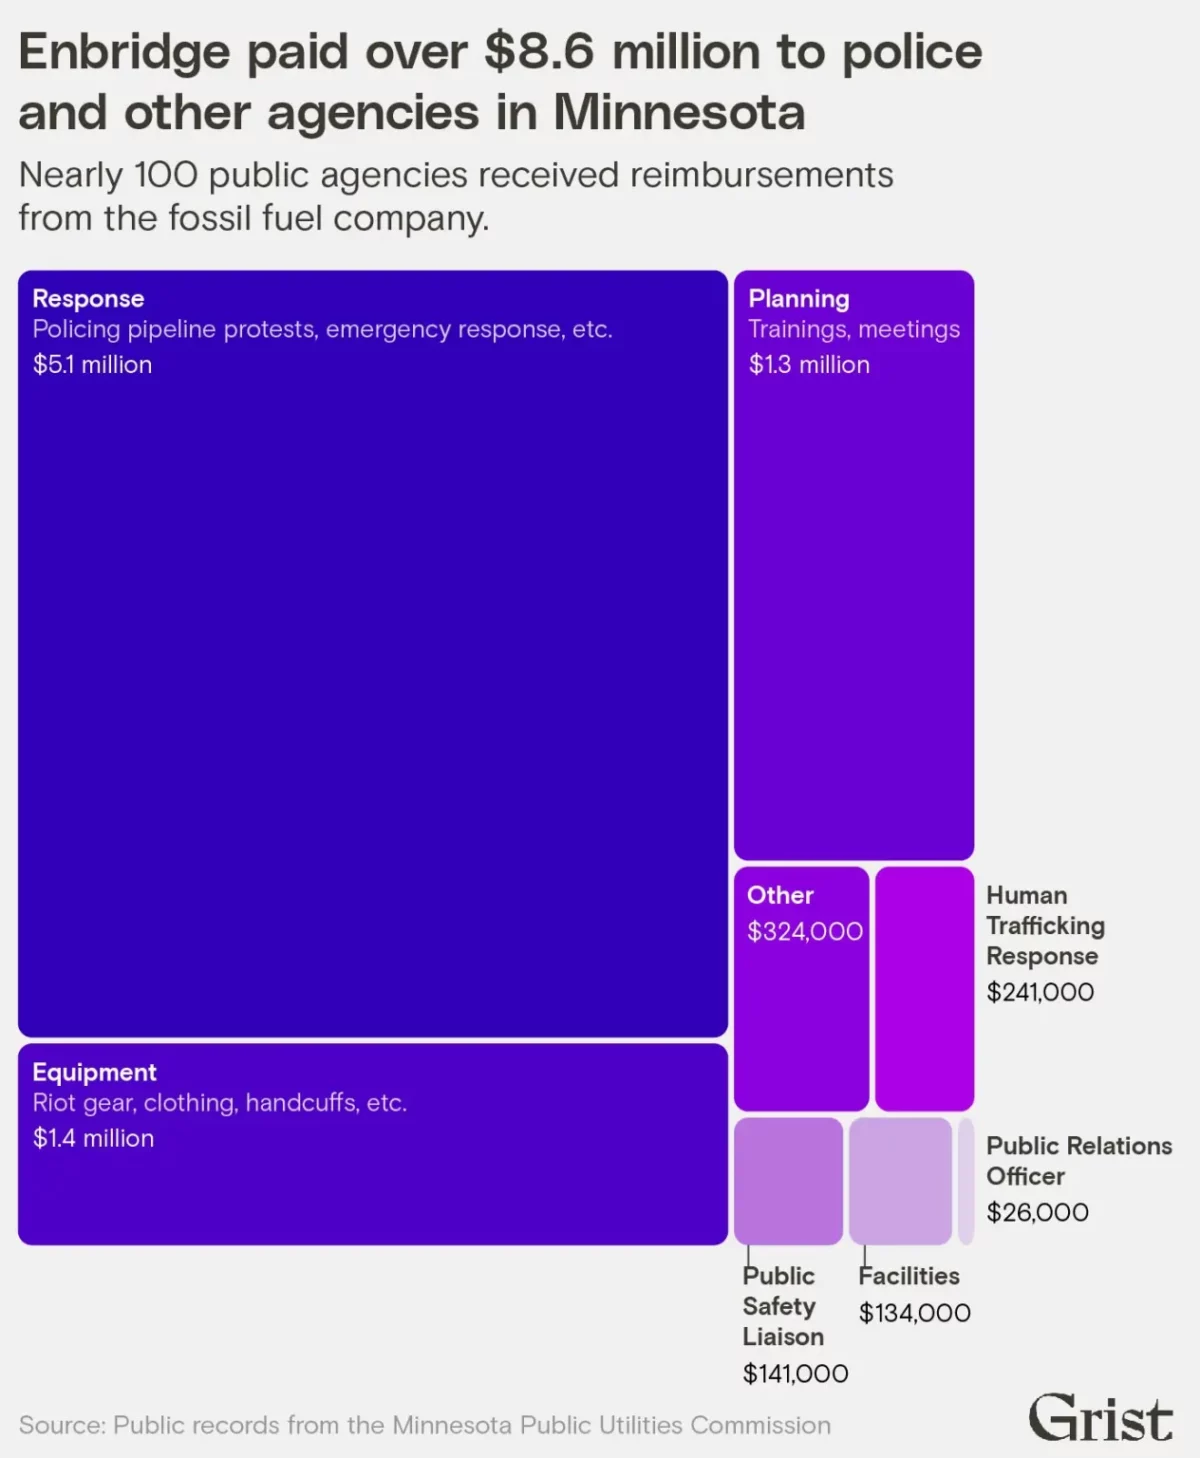 Graphic showing what the $8.6 million Enbridge paid to police and other agencies in Minnesota went to. 